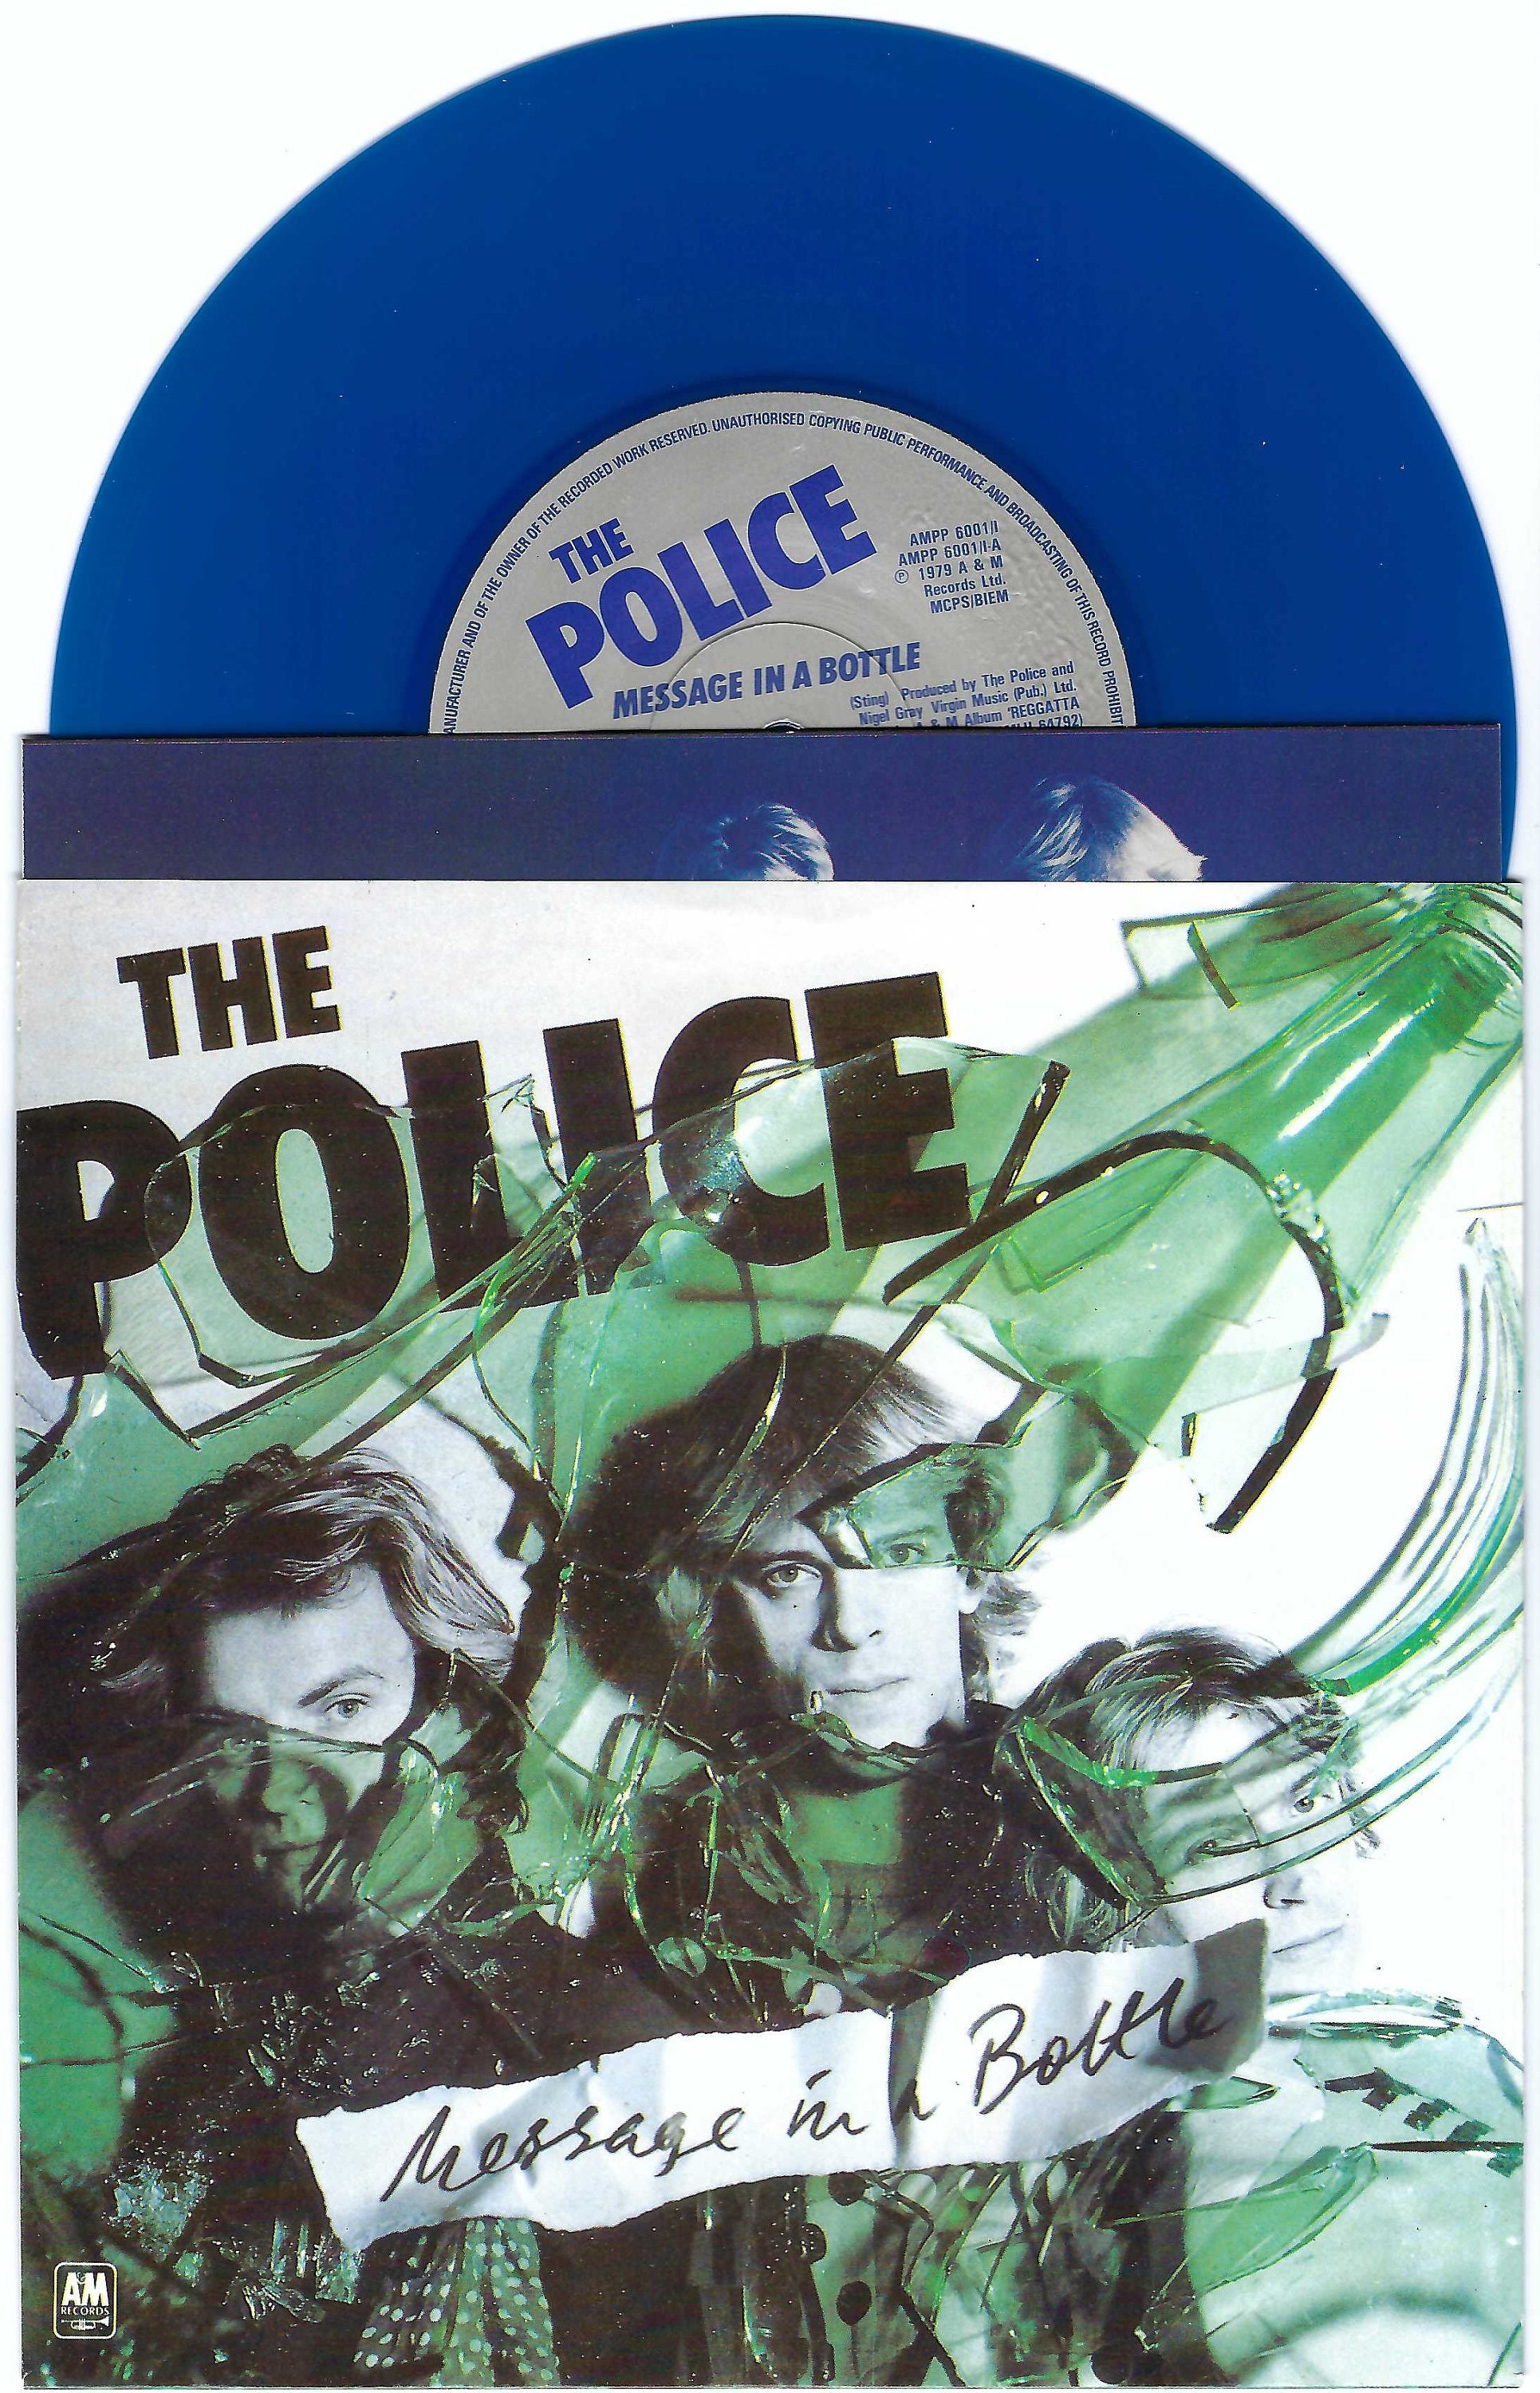 The police message. The Police message in a Bottle. Police message in a Bottle нашивка.